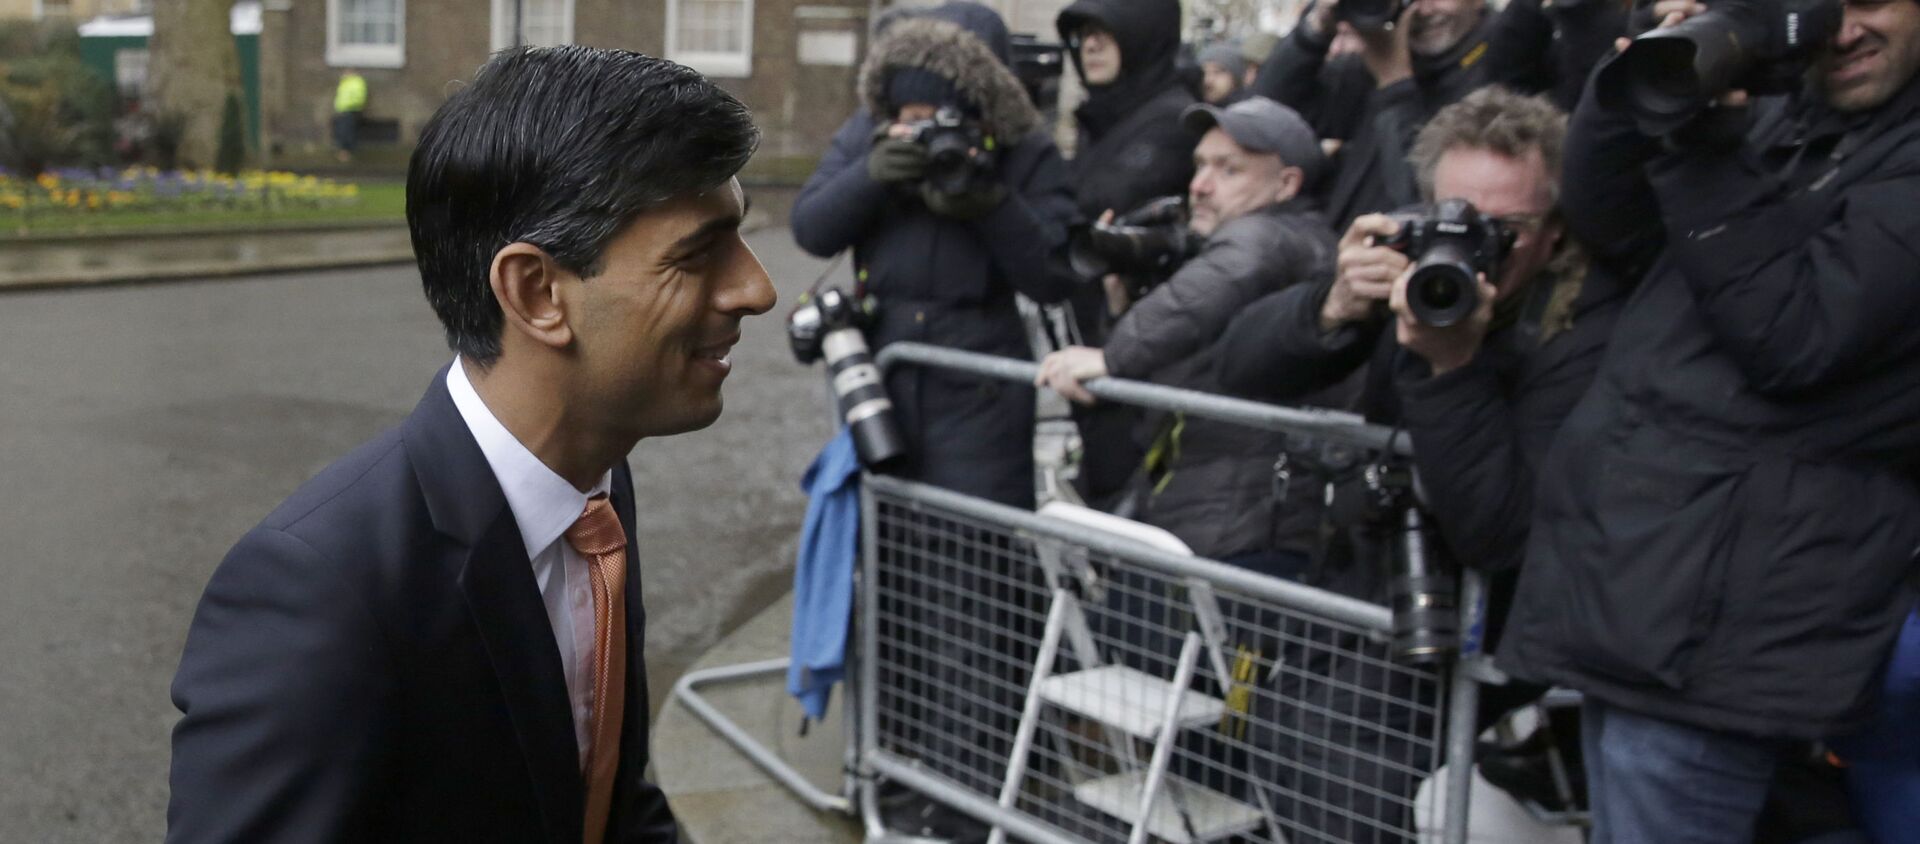 British lawmaker Rishi Sunak, and Chancellor of the Exchequer leaves 10 Downing Street, where he was given the job by Britain's Prime Minister Boris Johnson, as the former Chancellor Sajid Javid, resigned, in London, Thursday, Feb. 13, 2020 - Sputnik International, 1920, 22.08.2020